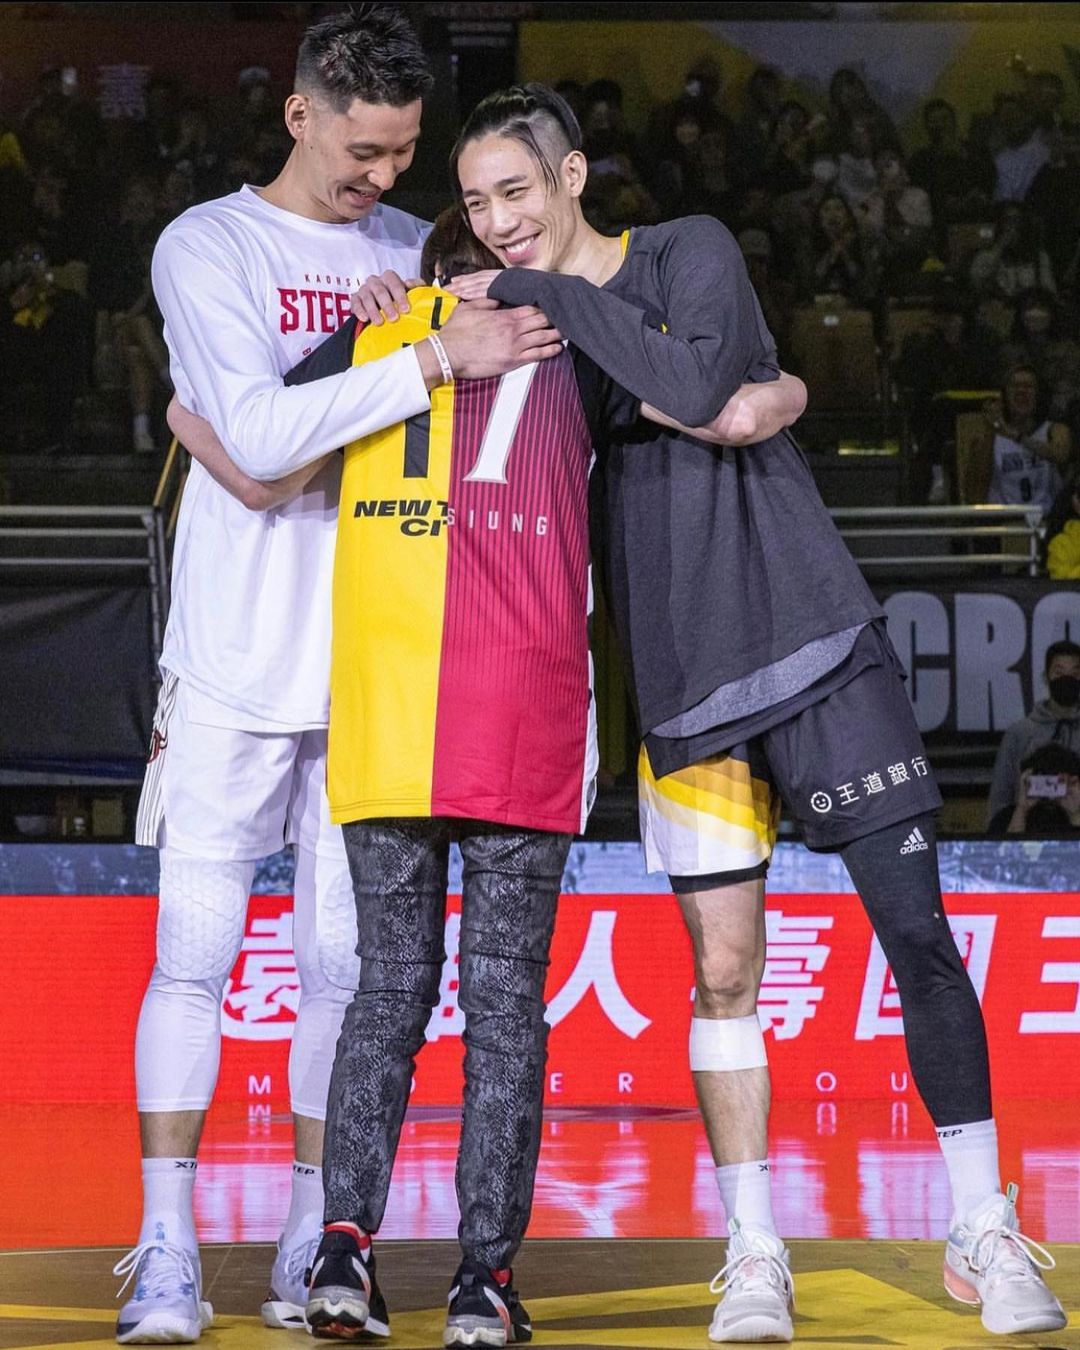 jeremy lin's mom hugging both of her sons at the basketball court